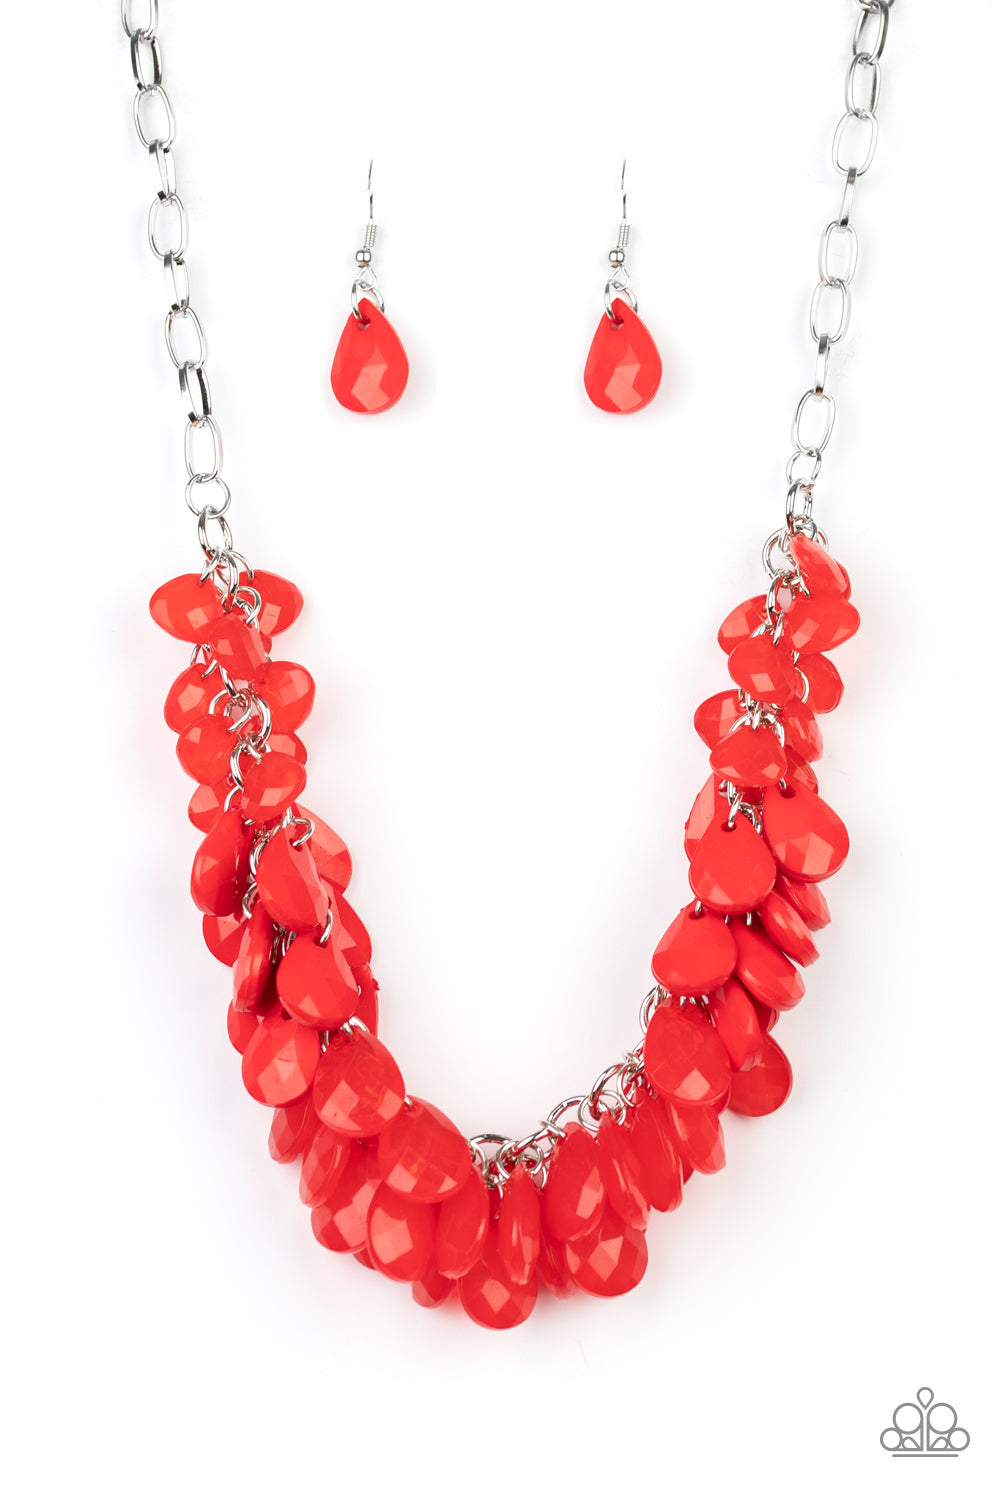 Colorfully Clustered - Red Item #N468 A fiery red collection of polished and crystal-like teardrop beads cluster along the bottom of a shimmery silver chain, creating a flirtatious fringe below the collar. Features an adjustable clasp closure. All Paparazzi Accessories are lead free and nickel free!  Sold as one individual necklace. Includes one pair of matching earrings.